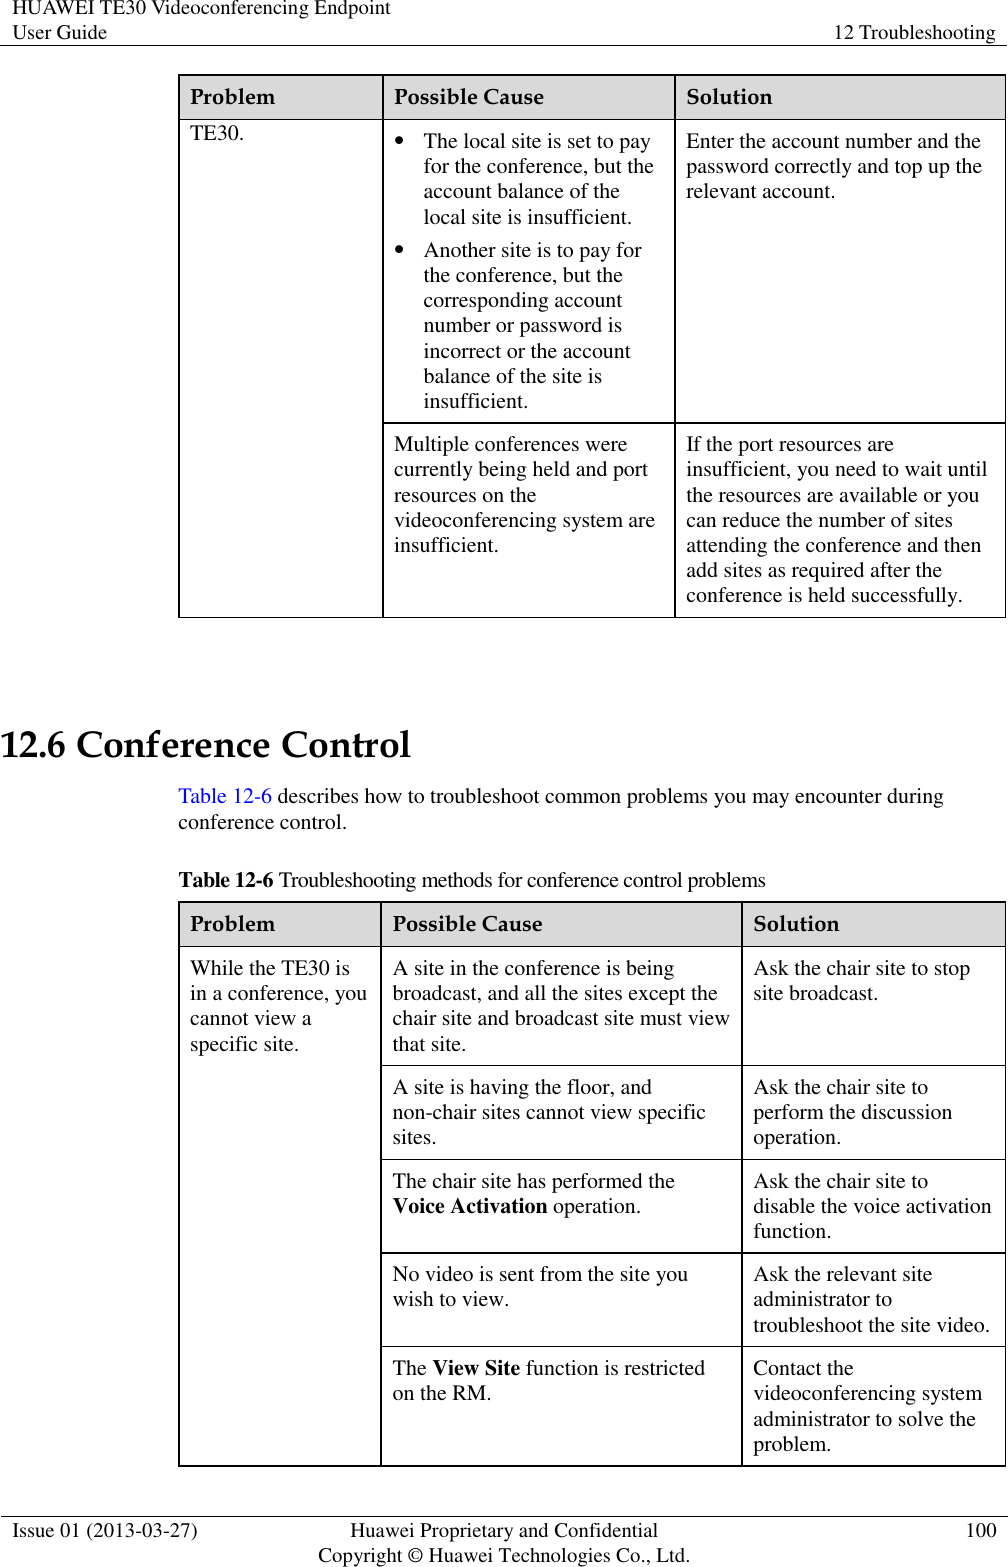 HUAWEI TE30 Videoconferencing Endpoint User Guide 12 Troubleshooting  Issue 01 (2013-03-27) Huawei Proprietary and Confidential                                     Copyright © Huawei Technologies Co., Ltd. 100  Problem Possible Cause Solution TE30.  The local site is set to pay for the conference, but the account balance of the local site is insufficient.    Another site is to pay for the conference, but the corresponding account number or password is incorrect or the account balance of the site is insufficient. Enter the account number and the password correctly and top up the relevant account. Multiple conferences were currently being held and port resources on the videoconferencing system are insufficient. If the port resources are insufficient, you need to wait until the resources are available or you can reduce the number of sites attending the conference and then add sites as required after the conference is held successfully.  12.6 Conference Control Table 12-6 describes how to troubleshoot common problems you may encounter during conference control. Table 12-6 Troubleshooting methods for conference control problems Problem Possible Cause Solution While the TE30 is in a conference, you cannot view a specific site. A site in the conference is being broadcast, and all the sites except the chair site and broadcast site must view that site. Ask the chair site to stop site broadcast. A site is having the floor, and non-chair sites cannot view specific sites. Ask the chair site to perform the discussion operation. The chair site has performed the Voice Activation operation. Ask the chair site to disable the voice activation function. No video is sent from the site you wish to view. Ask the relevant site administrator to troubleshoot the site video. The View Site function is restricted on the RM. Contact the videoconferencing system administrator to solve the problem. 